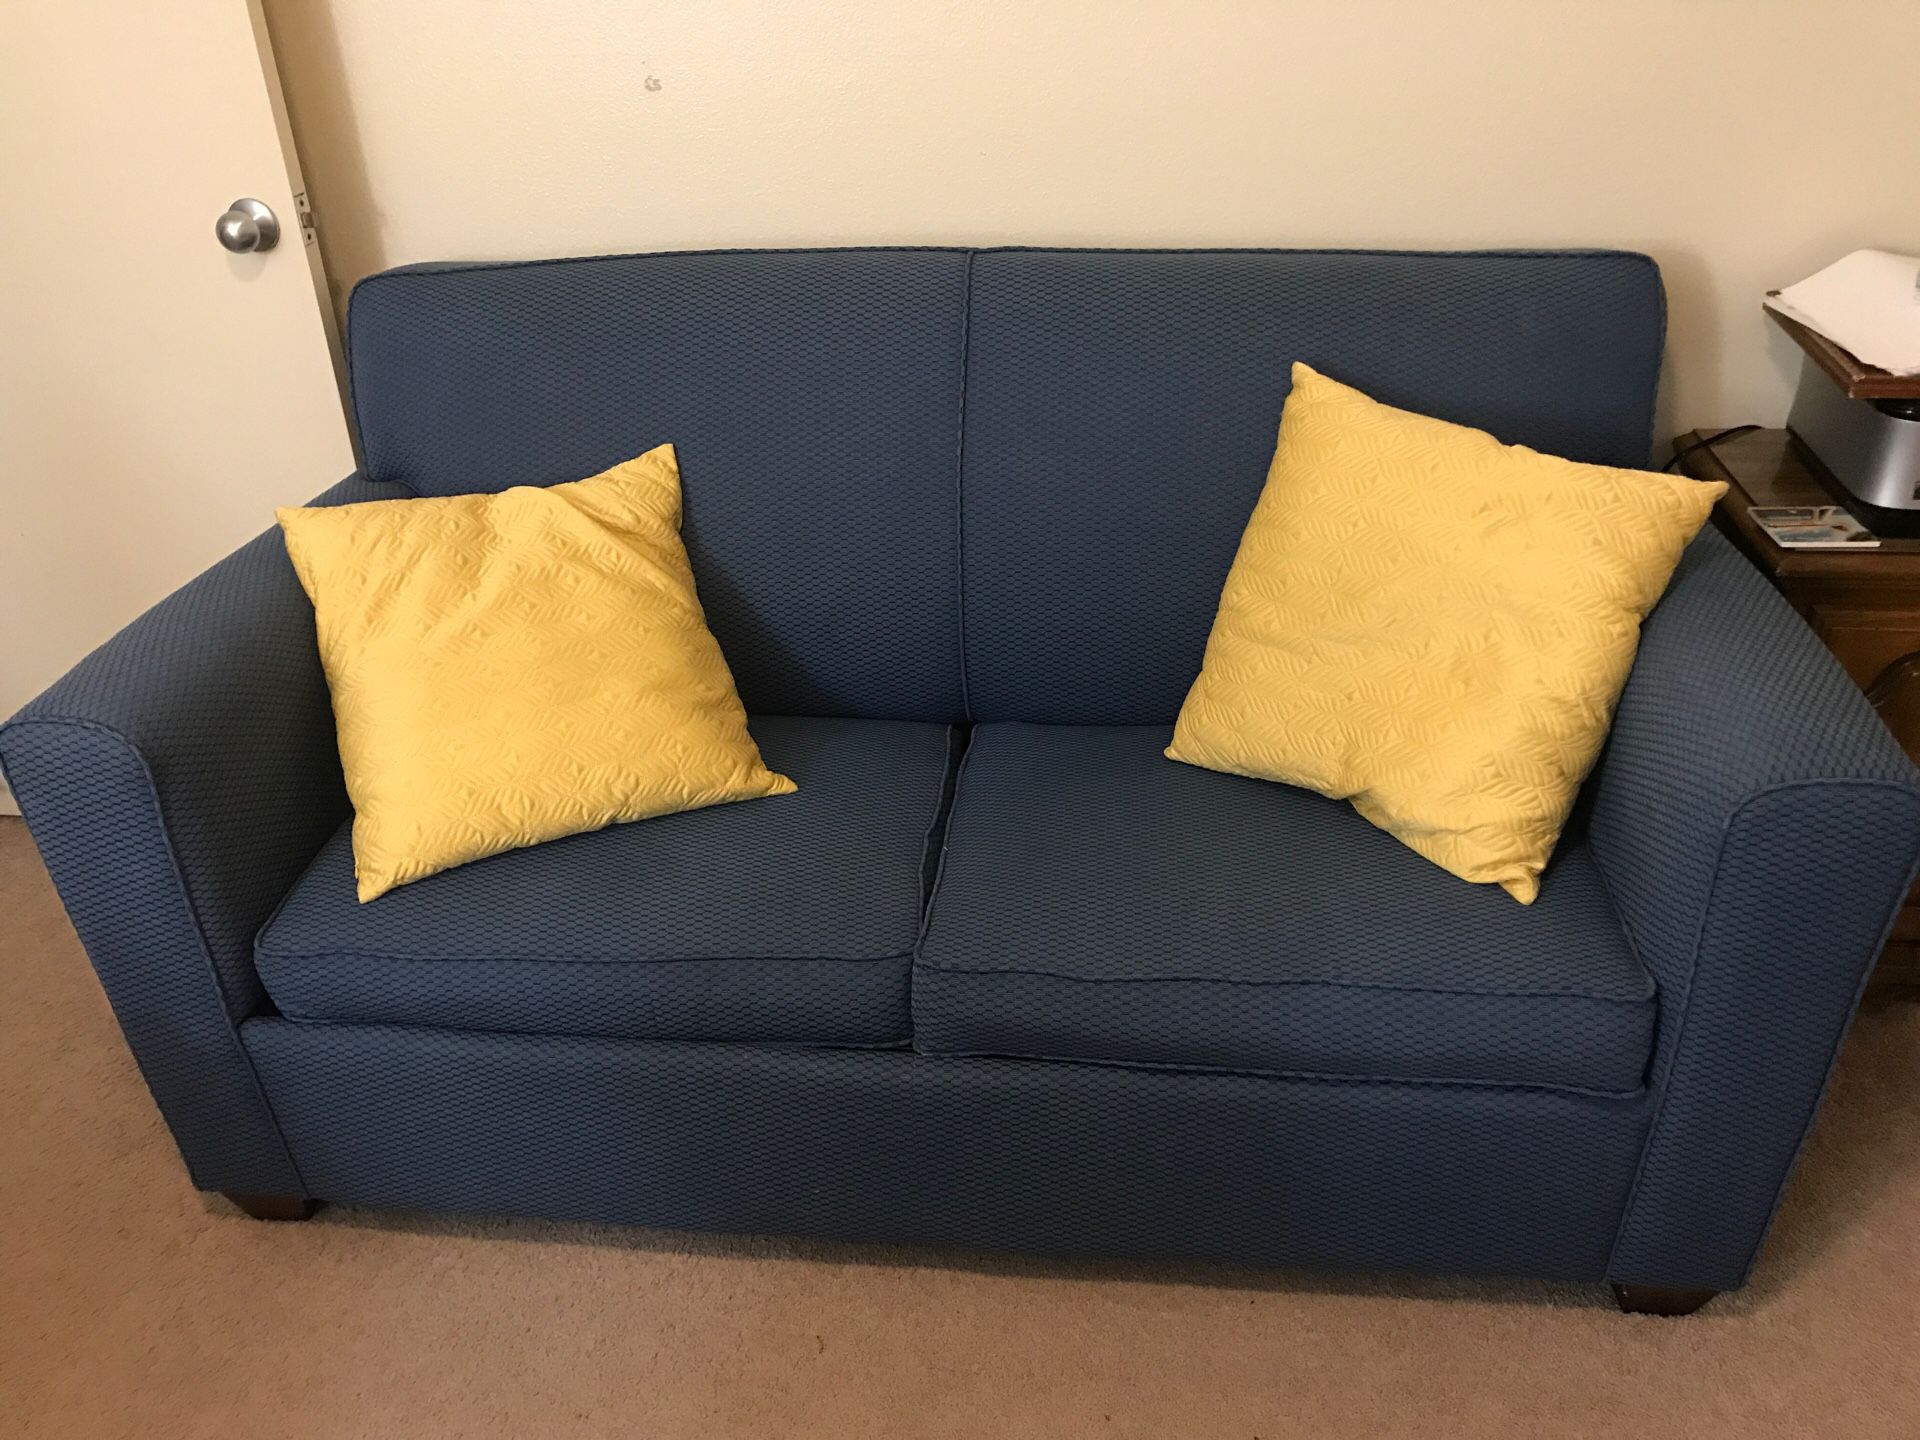 Comfy couch, with pull out bed!